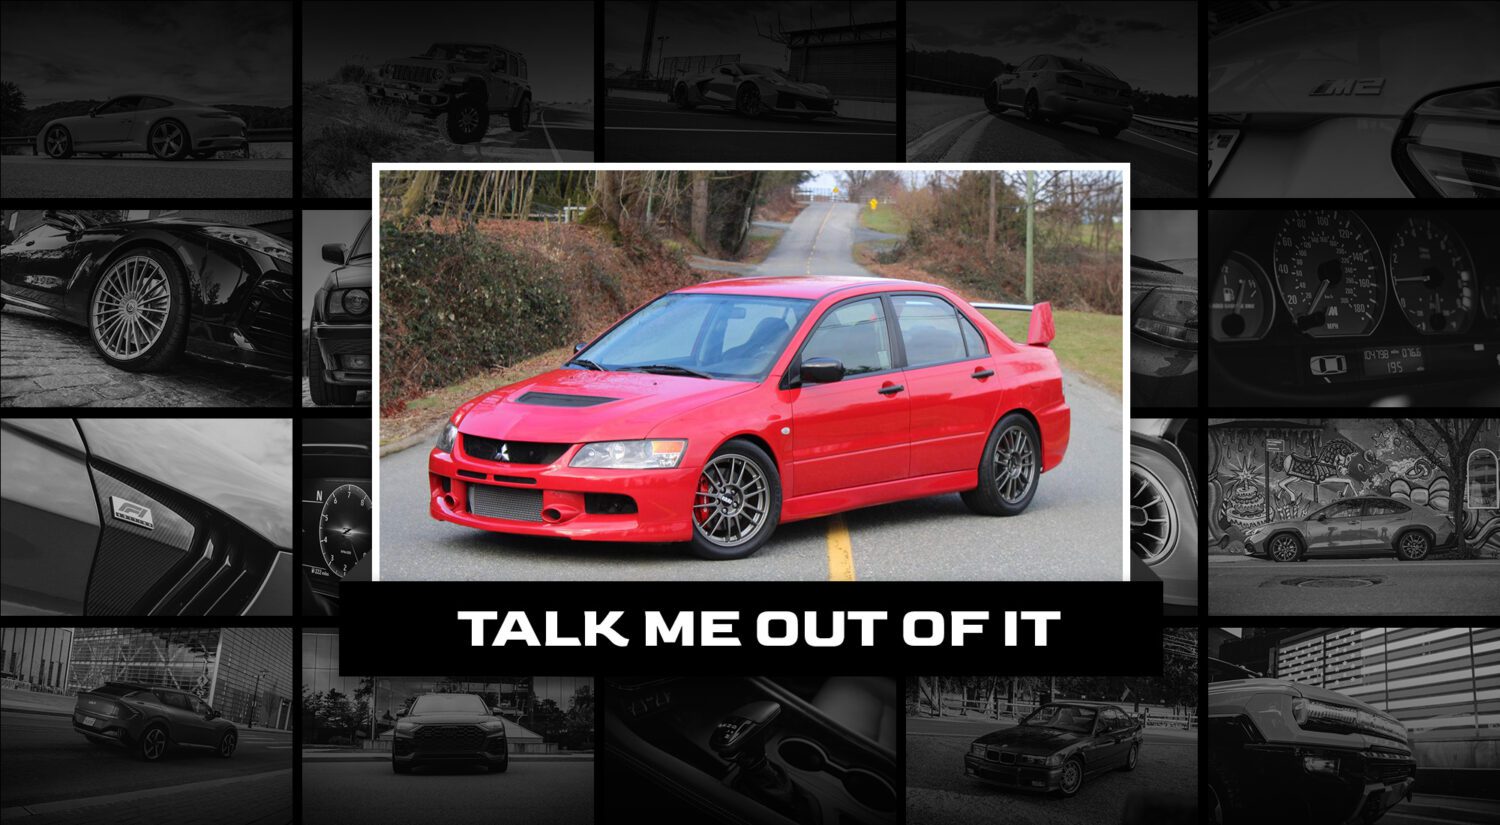 Let’s get furious with a Mitsubishi Lancer Evolution IX RS